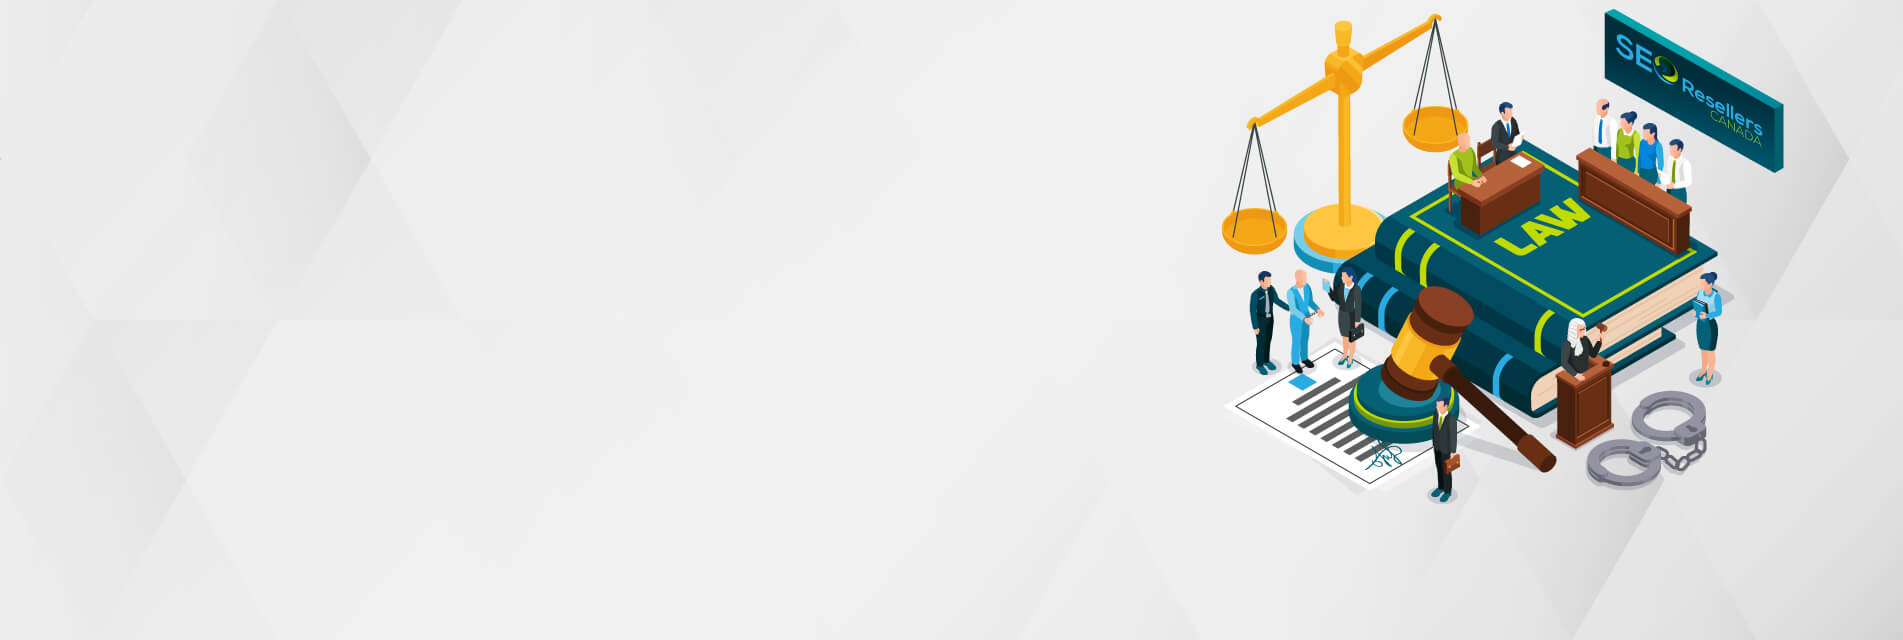 National Lawyer Industry SEO Case Study Banner